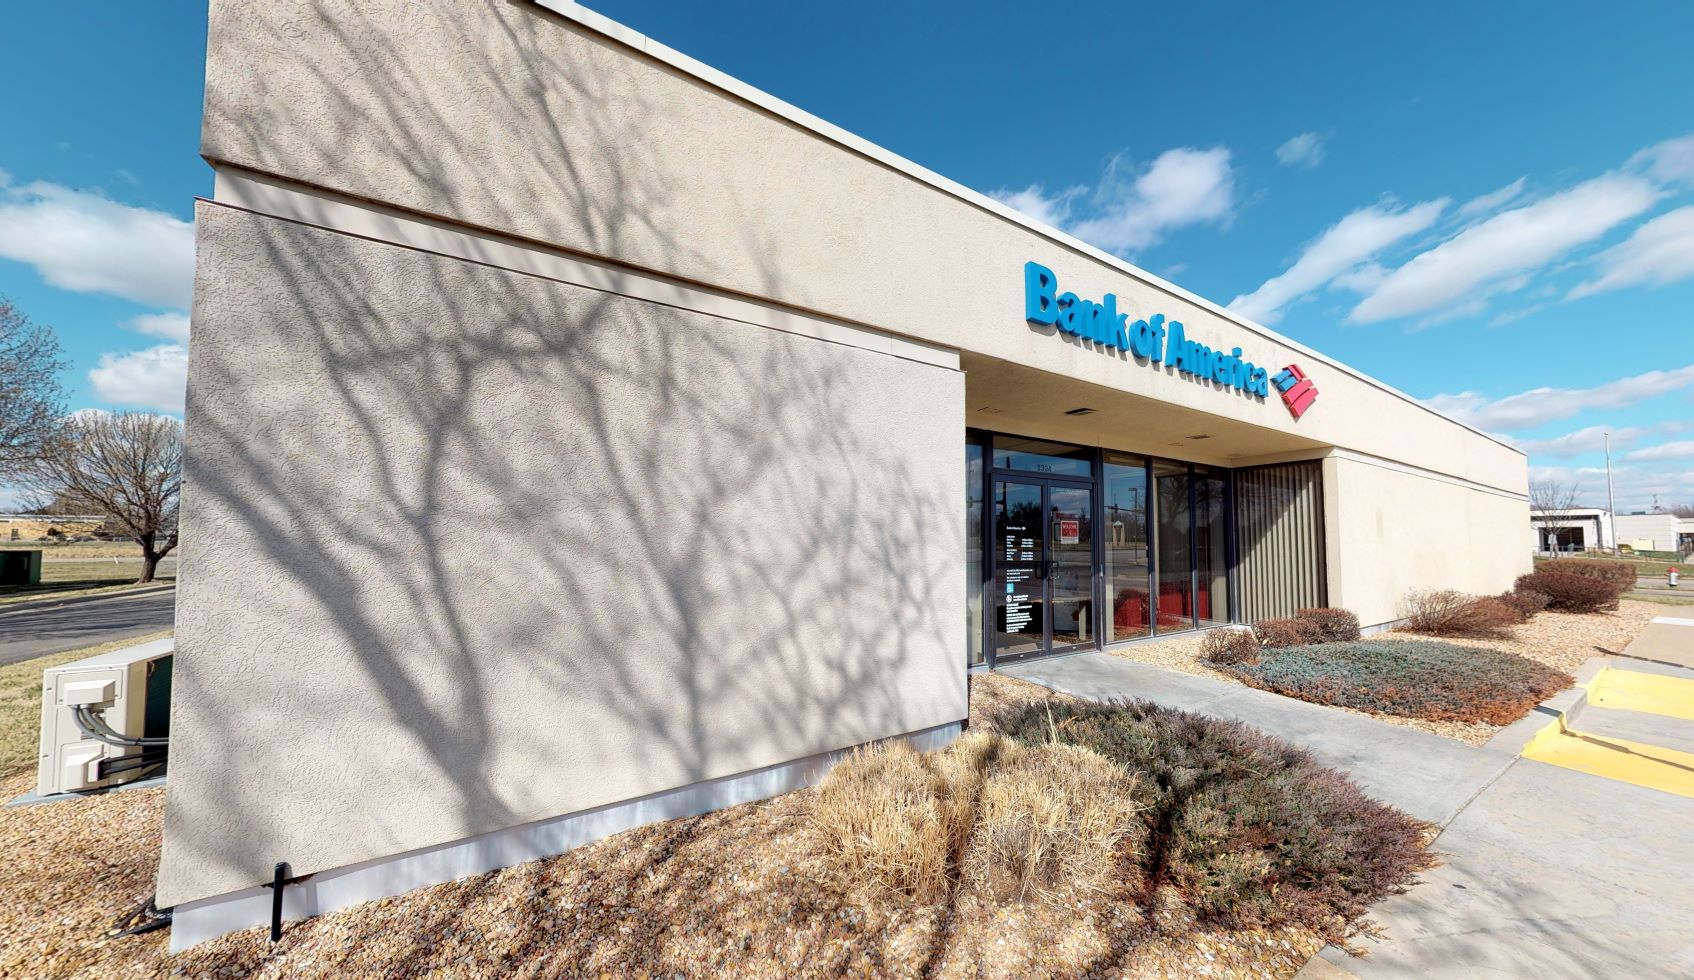 Bank of America financial center with drive-thru ATM and teller | 8304 W Central Ave, Wichita, KS 67212